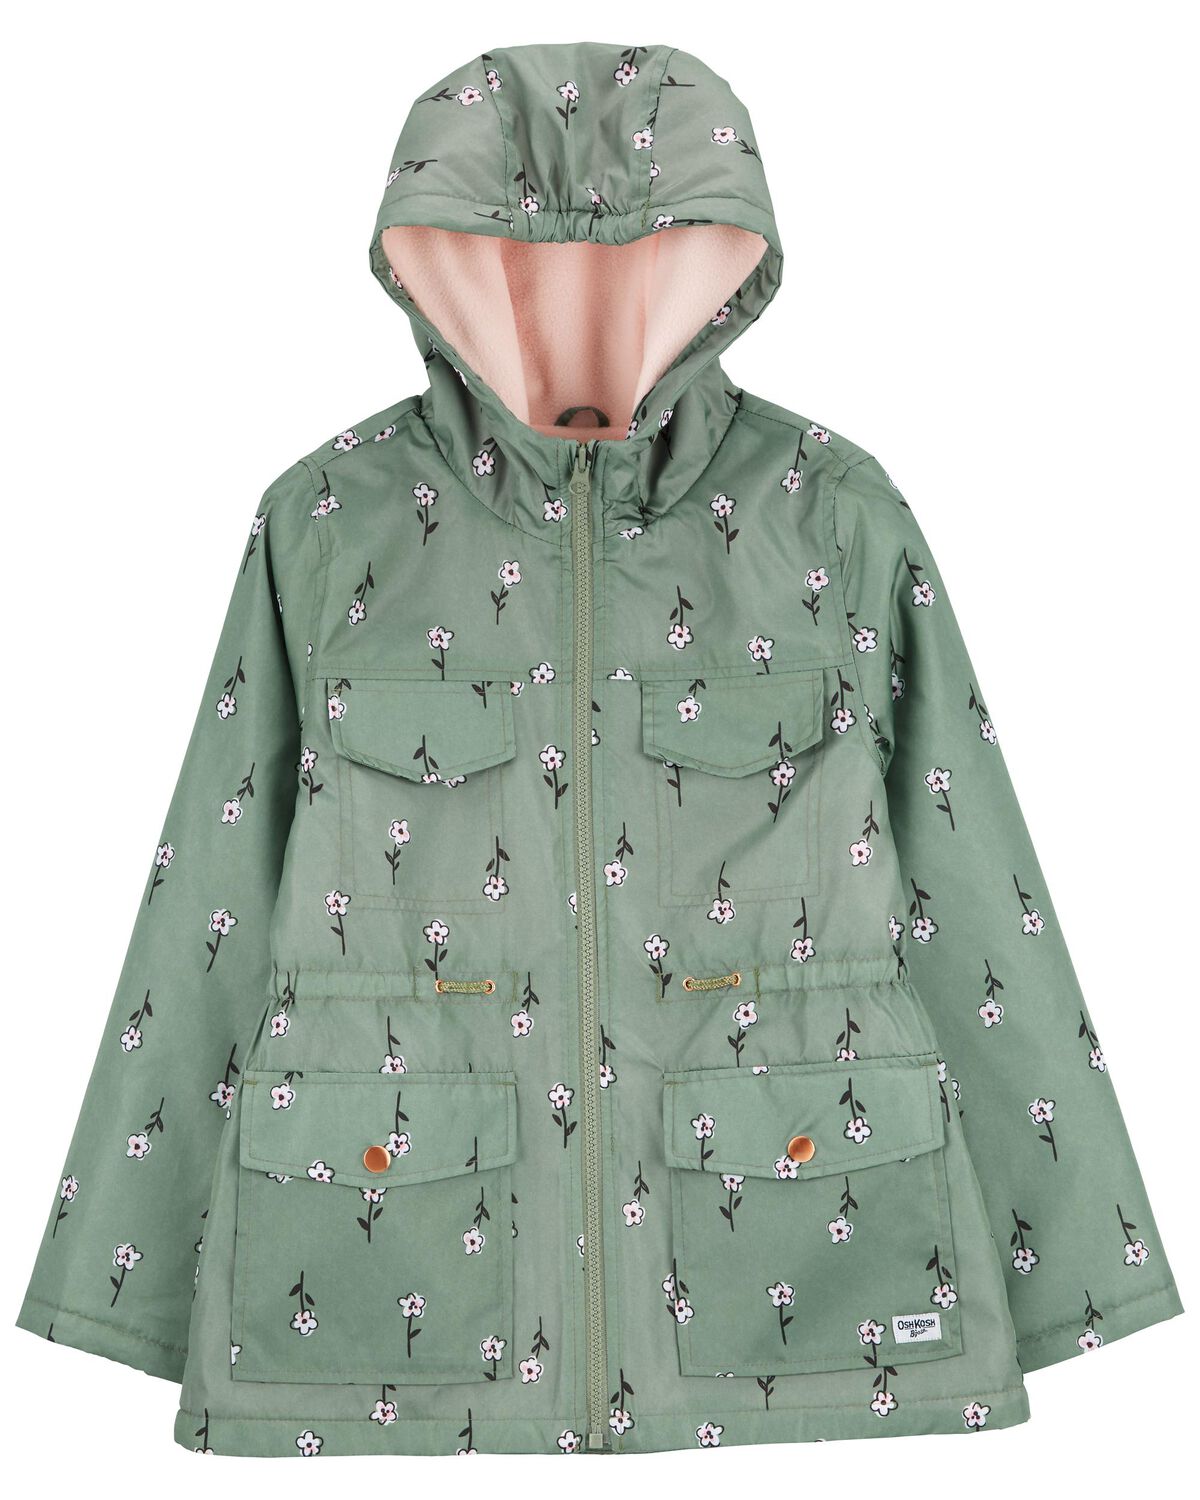 GYMBOREE Girls Green Floral XS 3 / 4 School or Play Snap Up Hooded Rain  Jacket on eBid United States